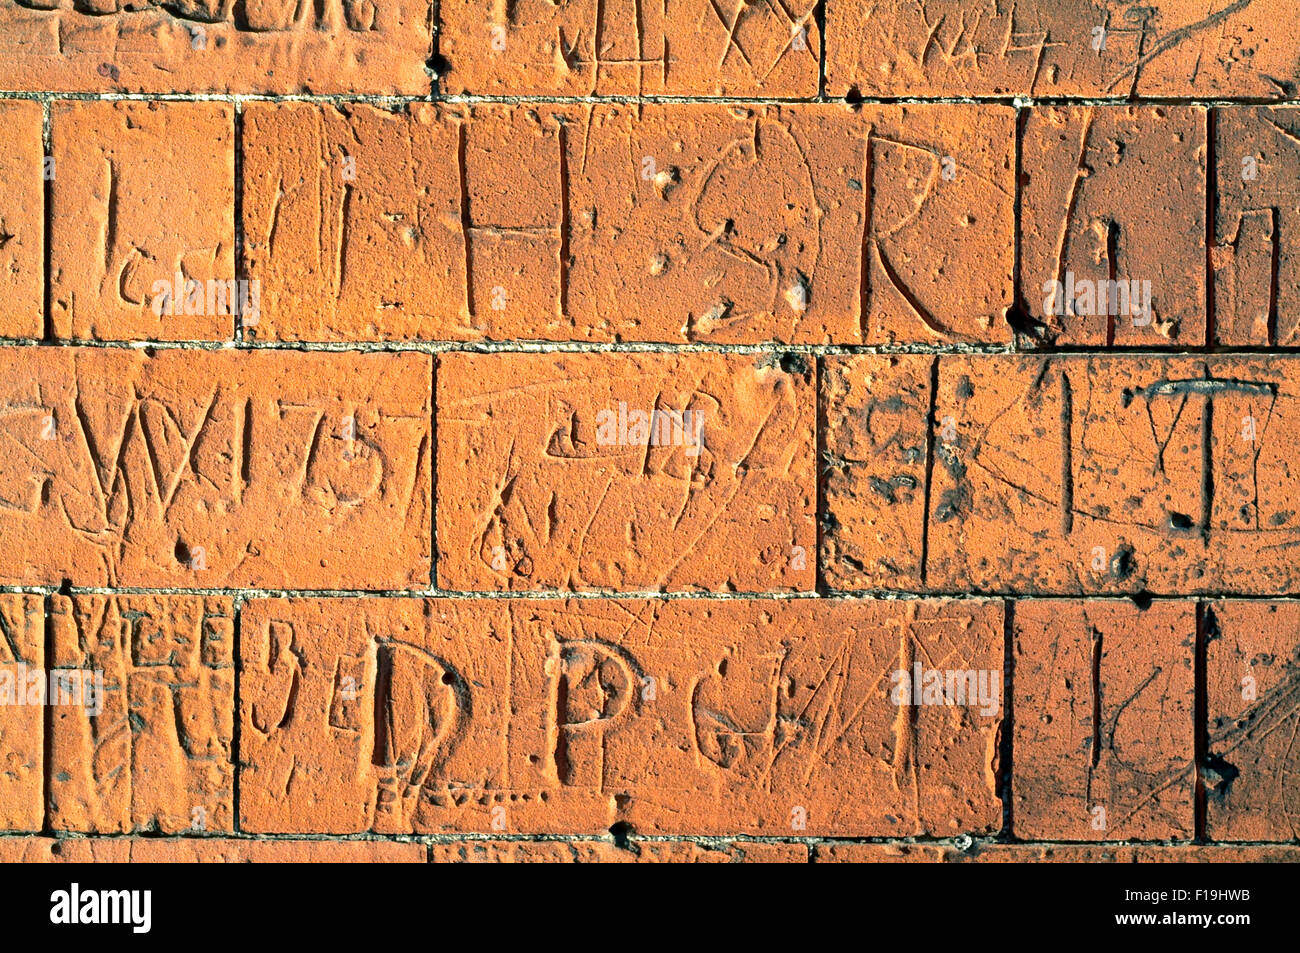 Brick Wall with carved signs and words Stock Photo